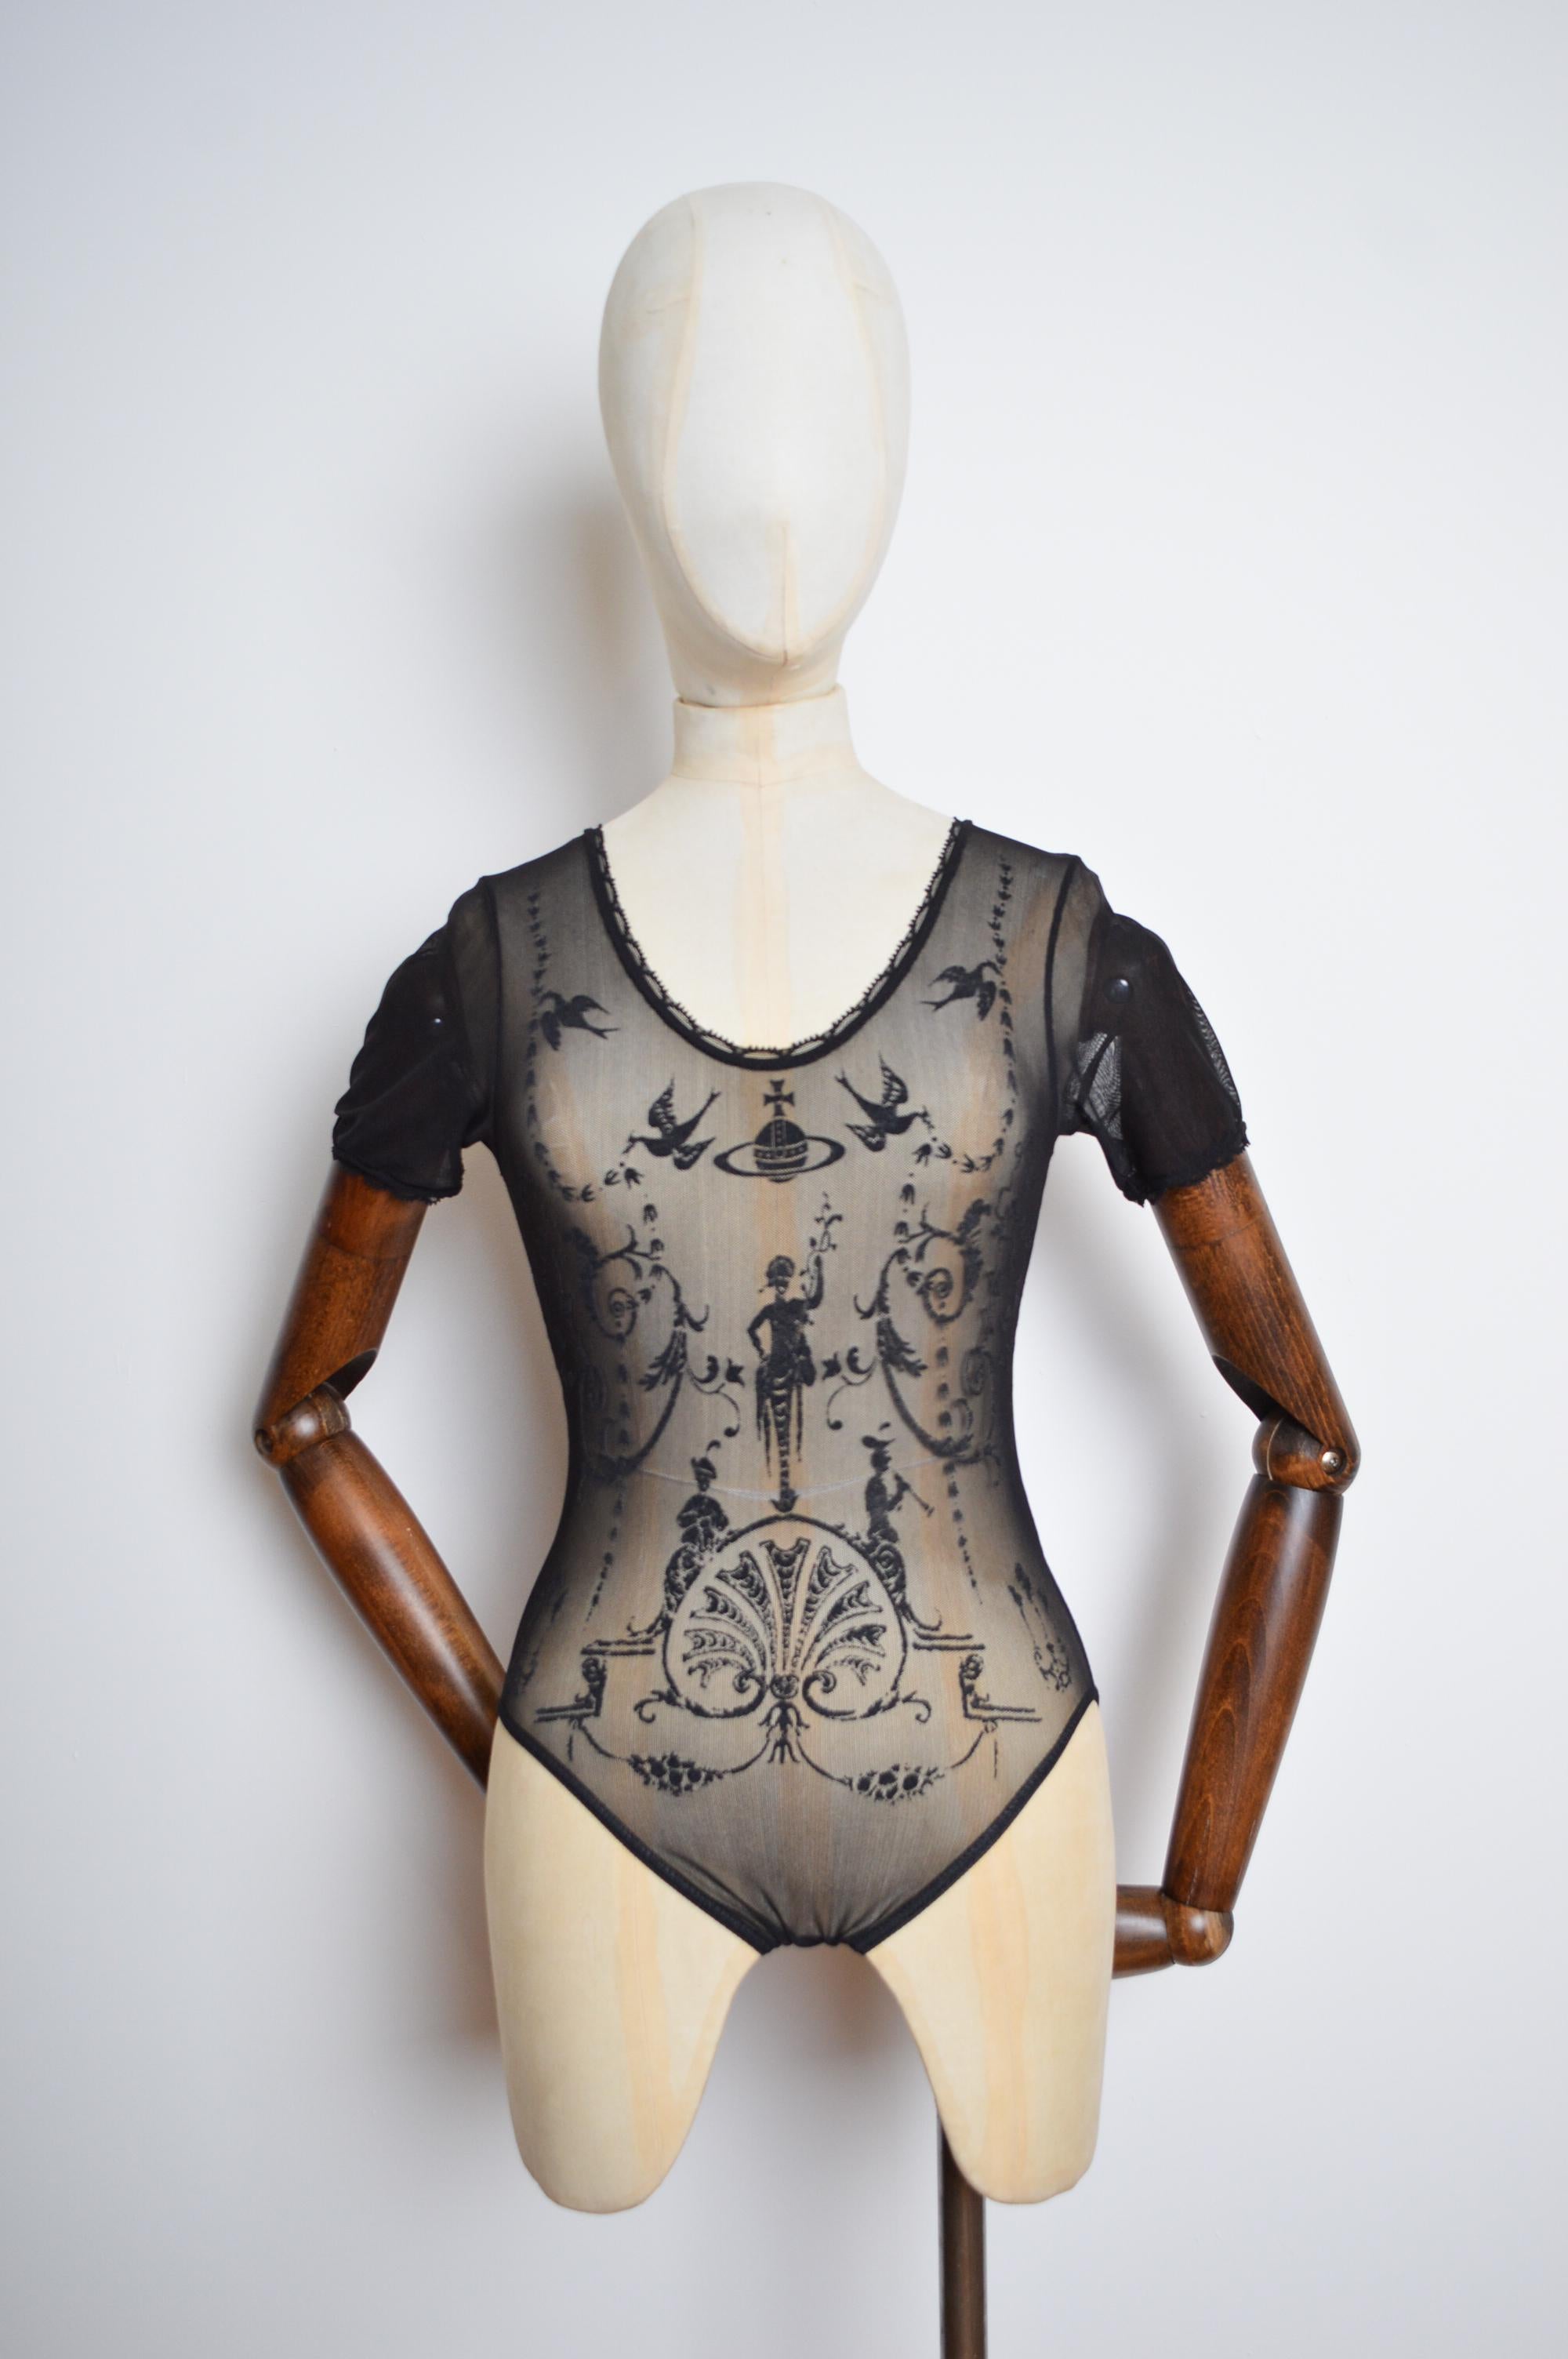 Iconic 1992 Vivienne Westwood x Sock Shop stretchy mesh Bodysuit.   

Size XS-S, The Mannequin seen here is a UK 6 and the Body suit fits Perfectly !   

Features:  
Short sleeves  
Scooped Neckline
Patterned front    

Great Condition - Light to